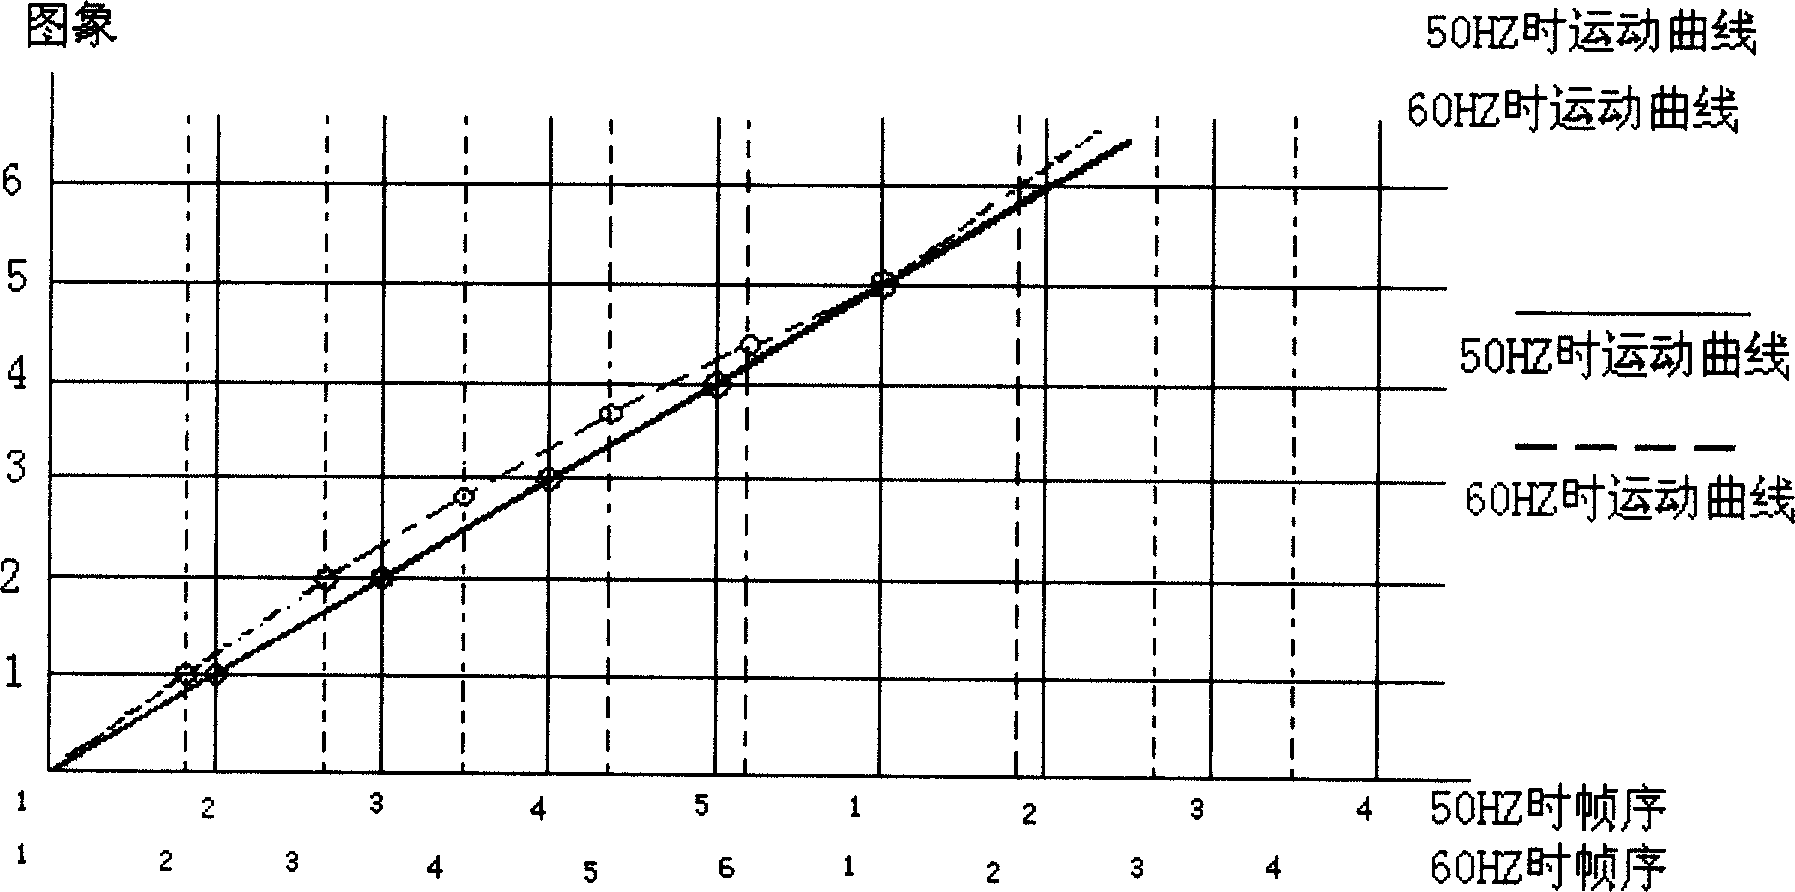 Kernel method for promoting analogue picture to digita picture